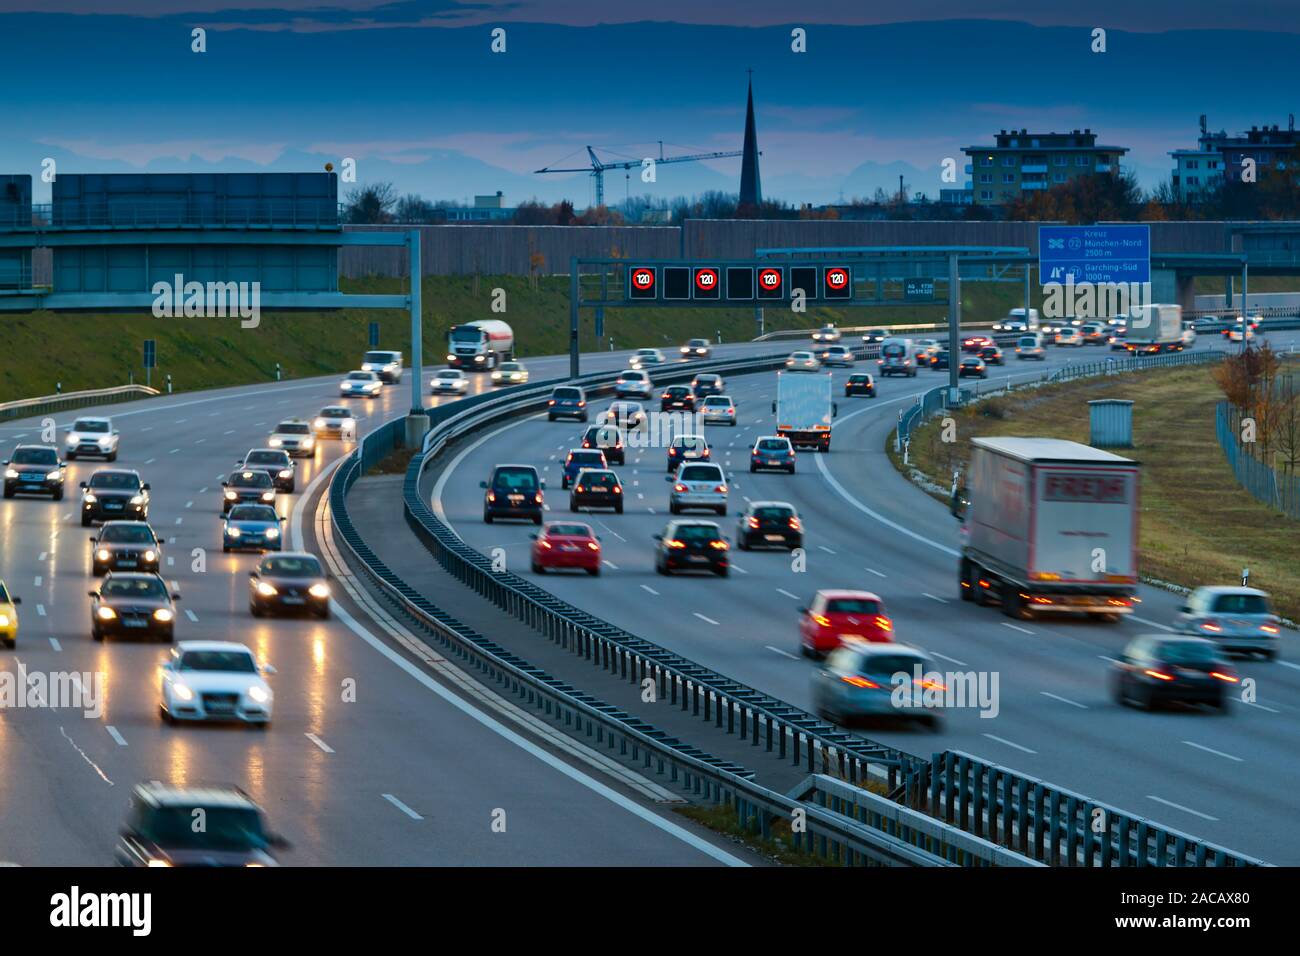 Cars in traffic on a highway Stock Photo